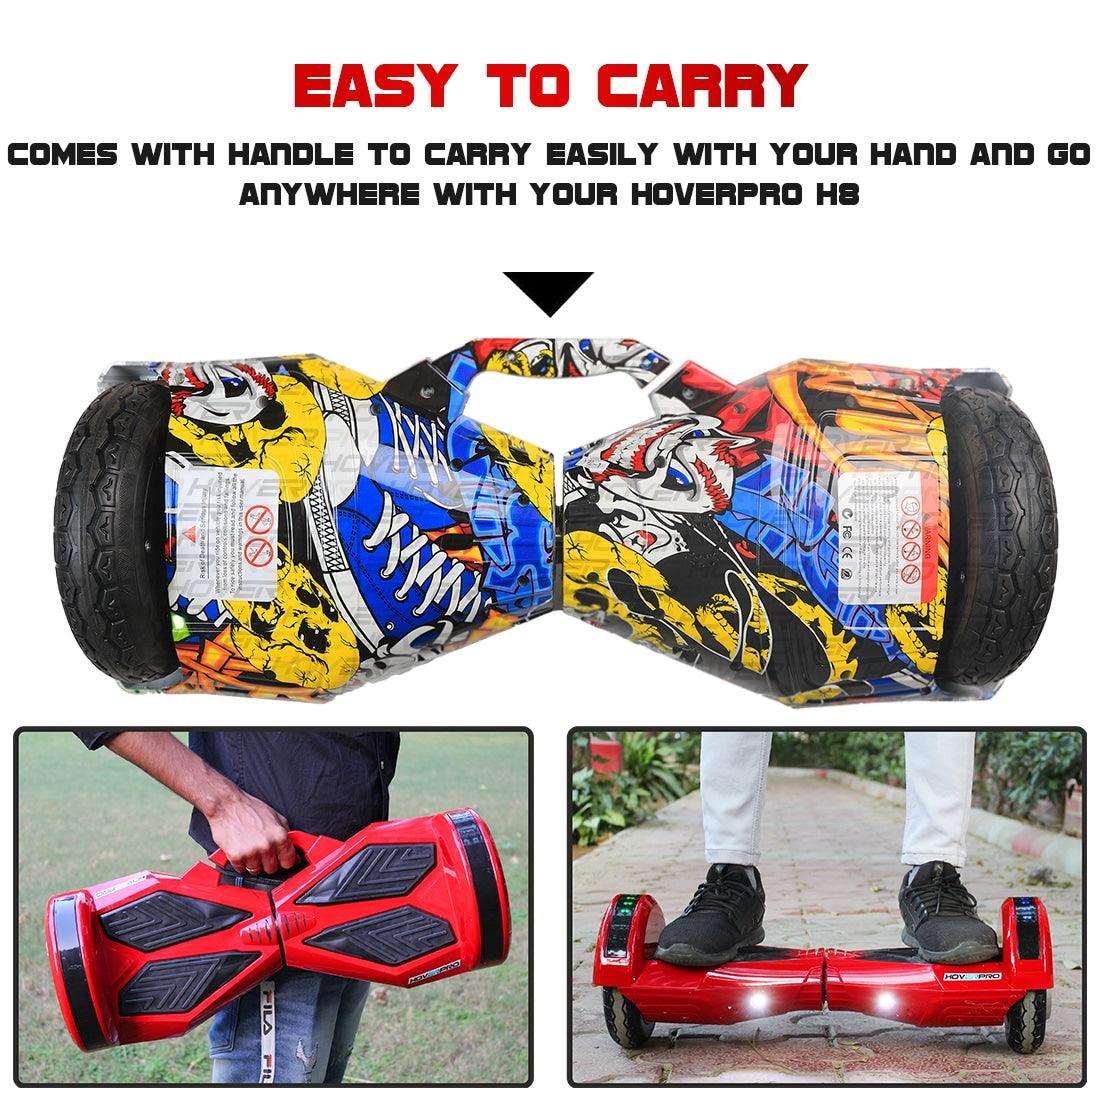 PATOYS | H8 Skullcandy Hoverboard with Remote, Bag and Long Range Battery (Assorted Color) hoverboard PATOYS